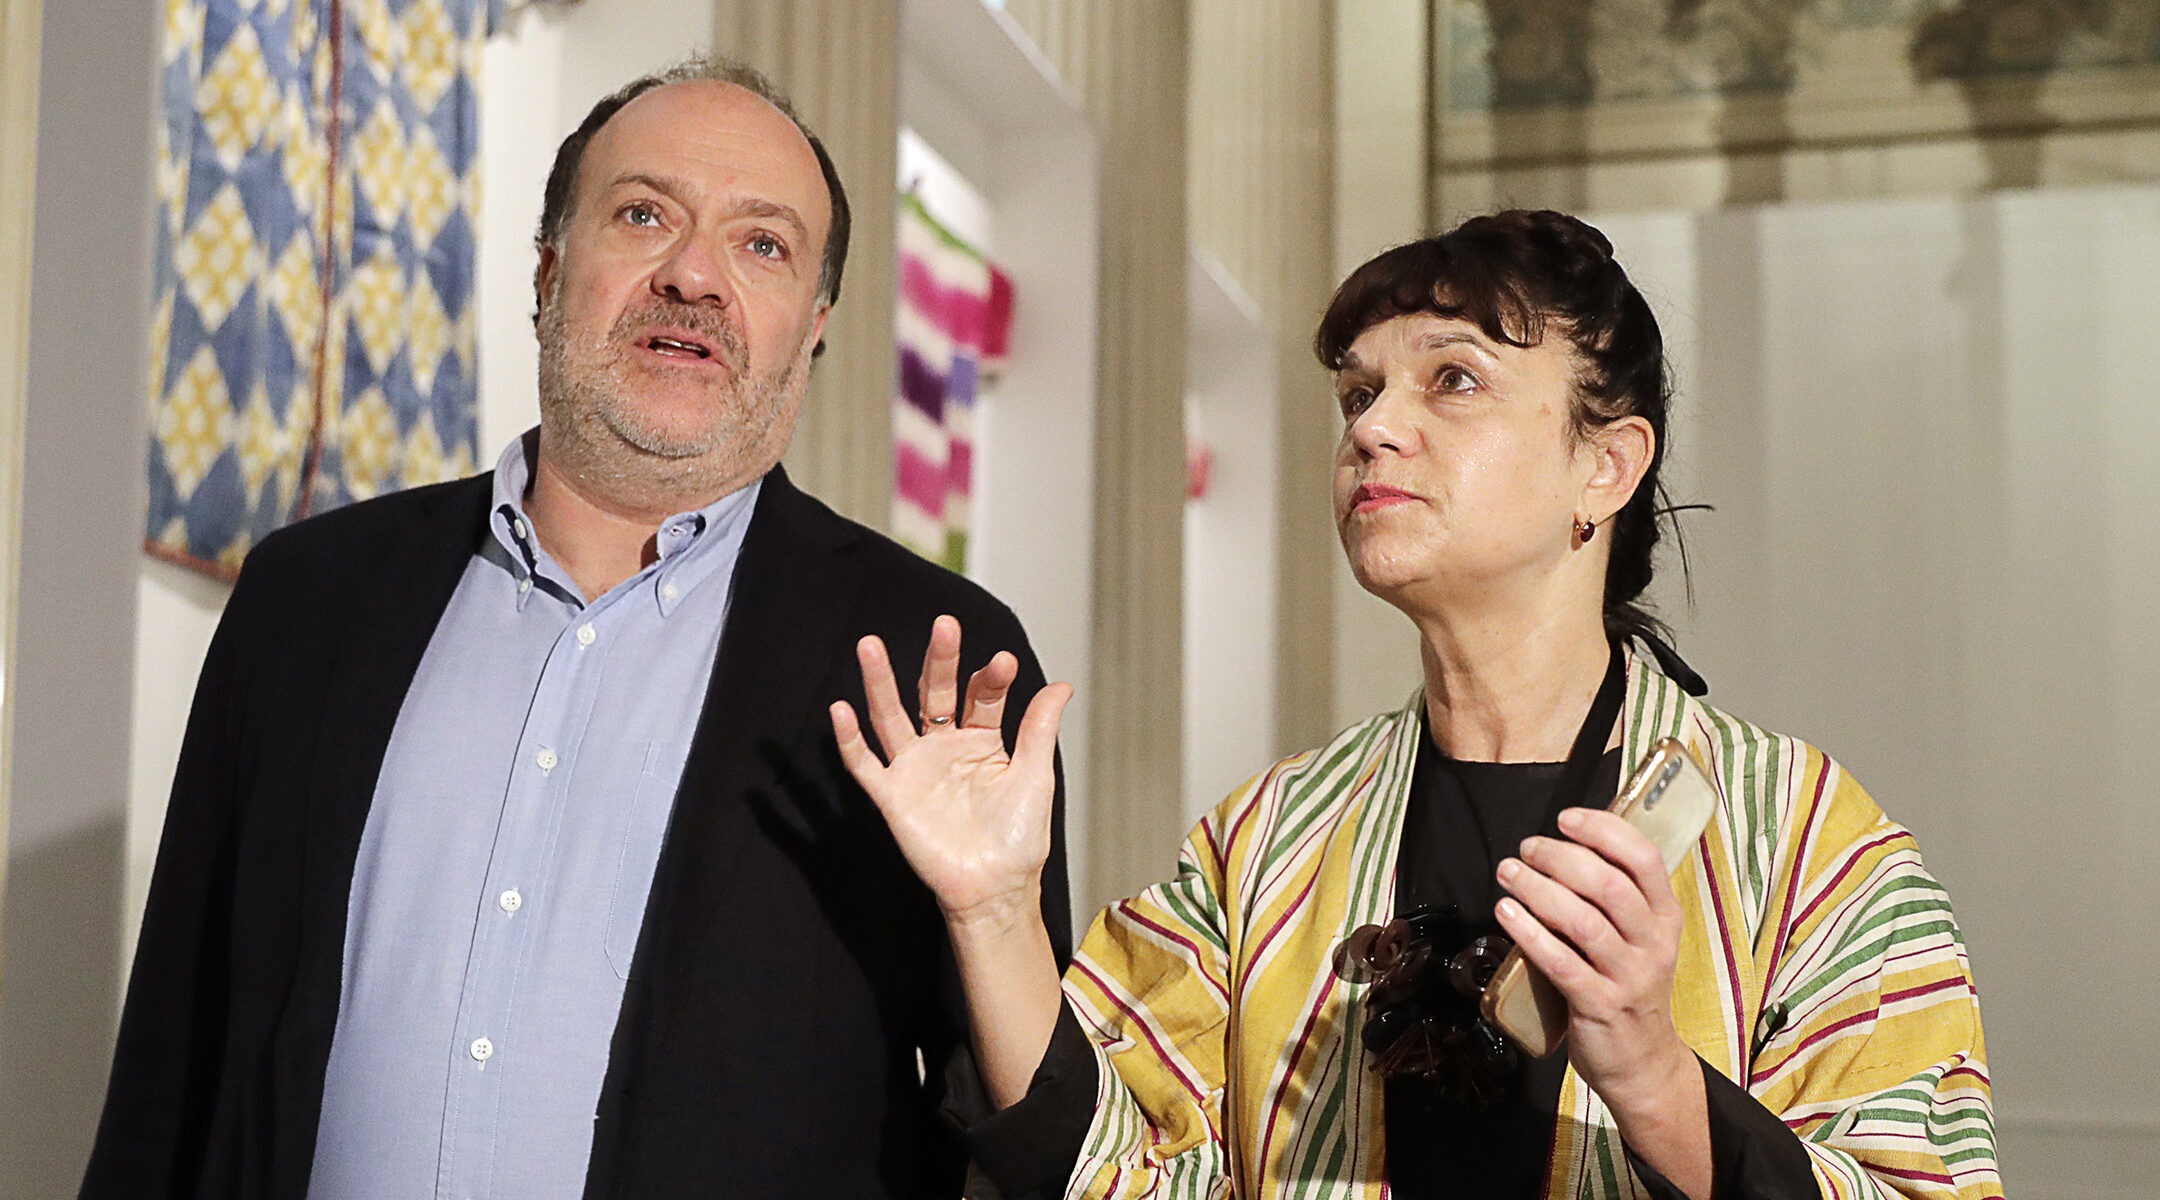 Alexander Klyachin listens to and Marina Loshak, director of the Pushkin State Museum at her institution in Moscow, Russia on Sept. 30, 2019. (Mikhail Metzel\TASS via Getty Images)